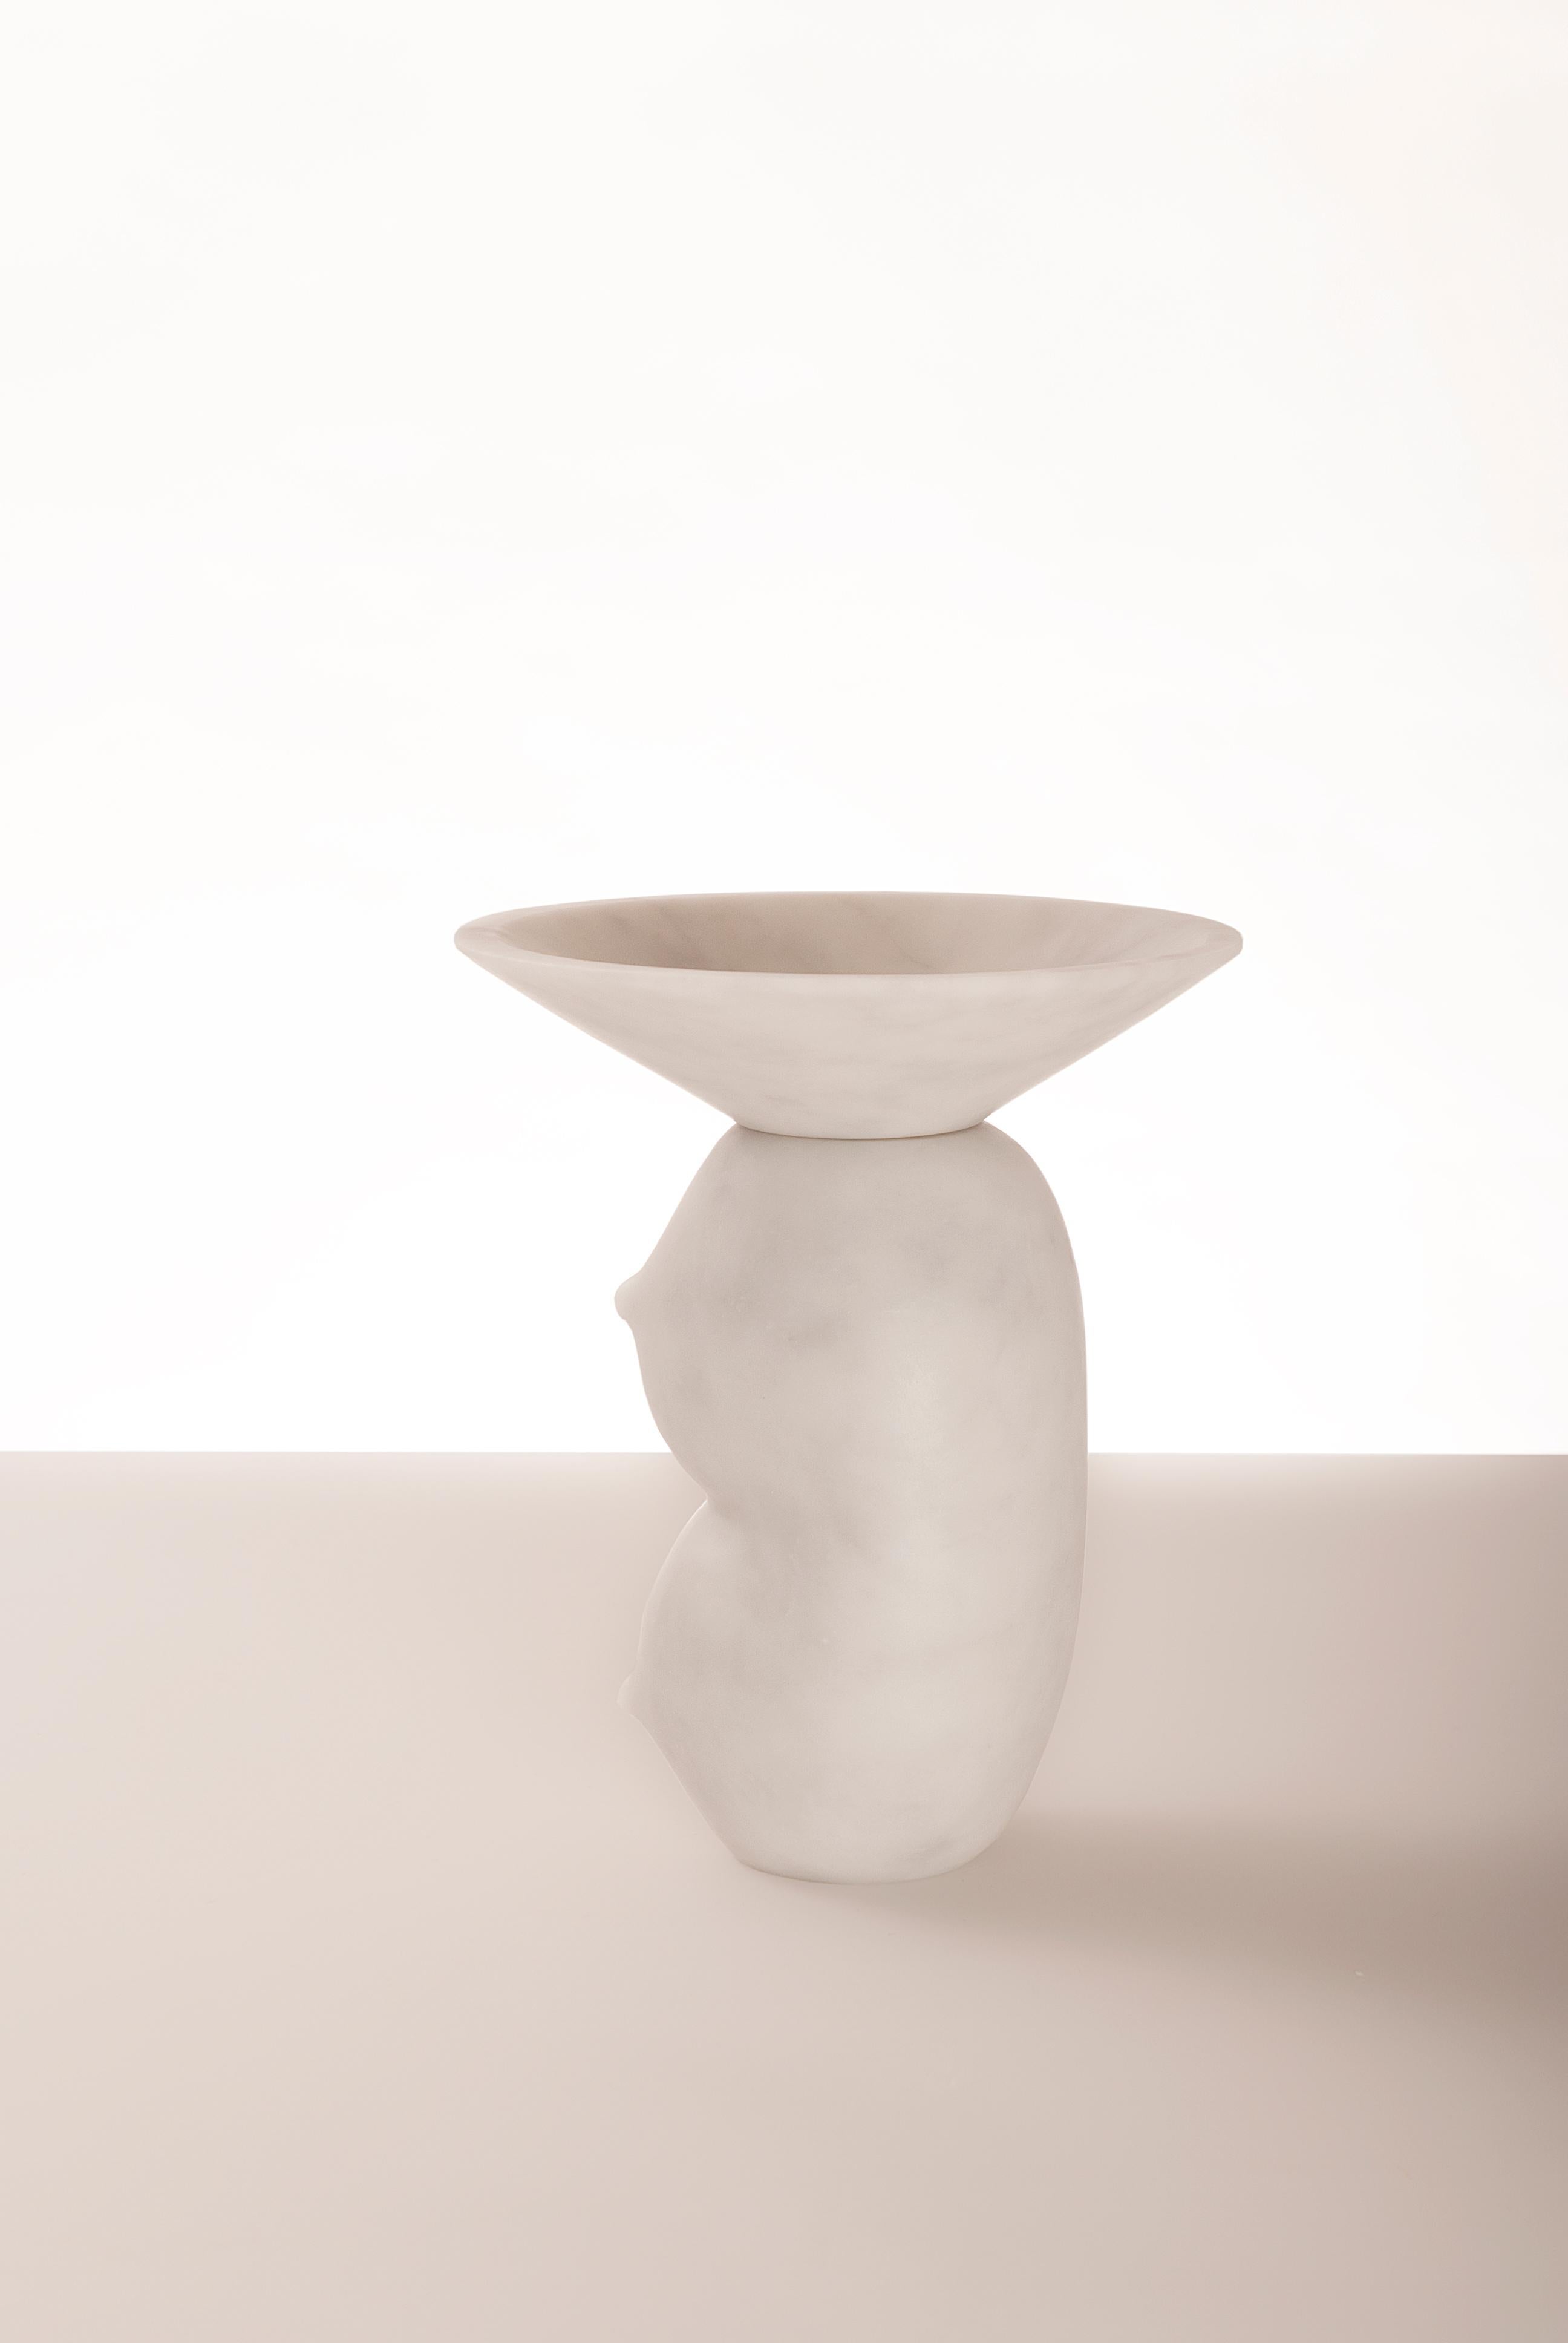 Celia - Duo-Marble Contemporary vase - Valentina Cameranesi
Materials: White carrara marble (Also available in Noir Antique + Portugal Pink)
Dimensions: 31 x 24 x 24 cm

The “Avalon” series consists of 3 sculptural vases, made of White